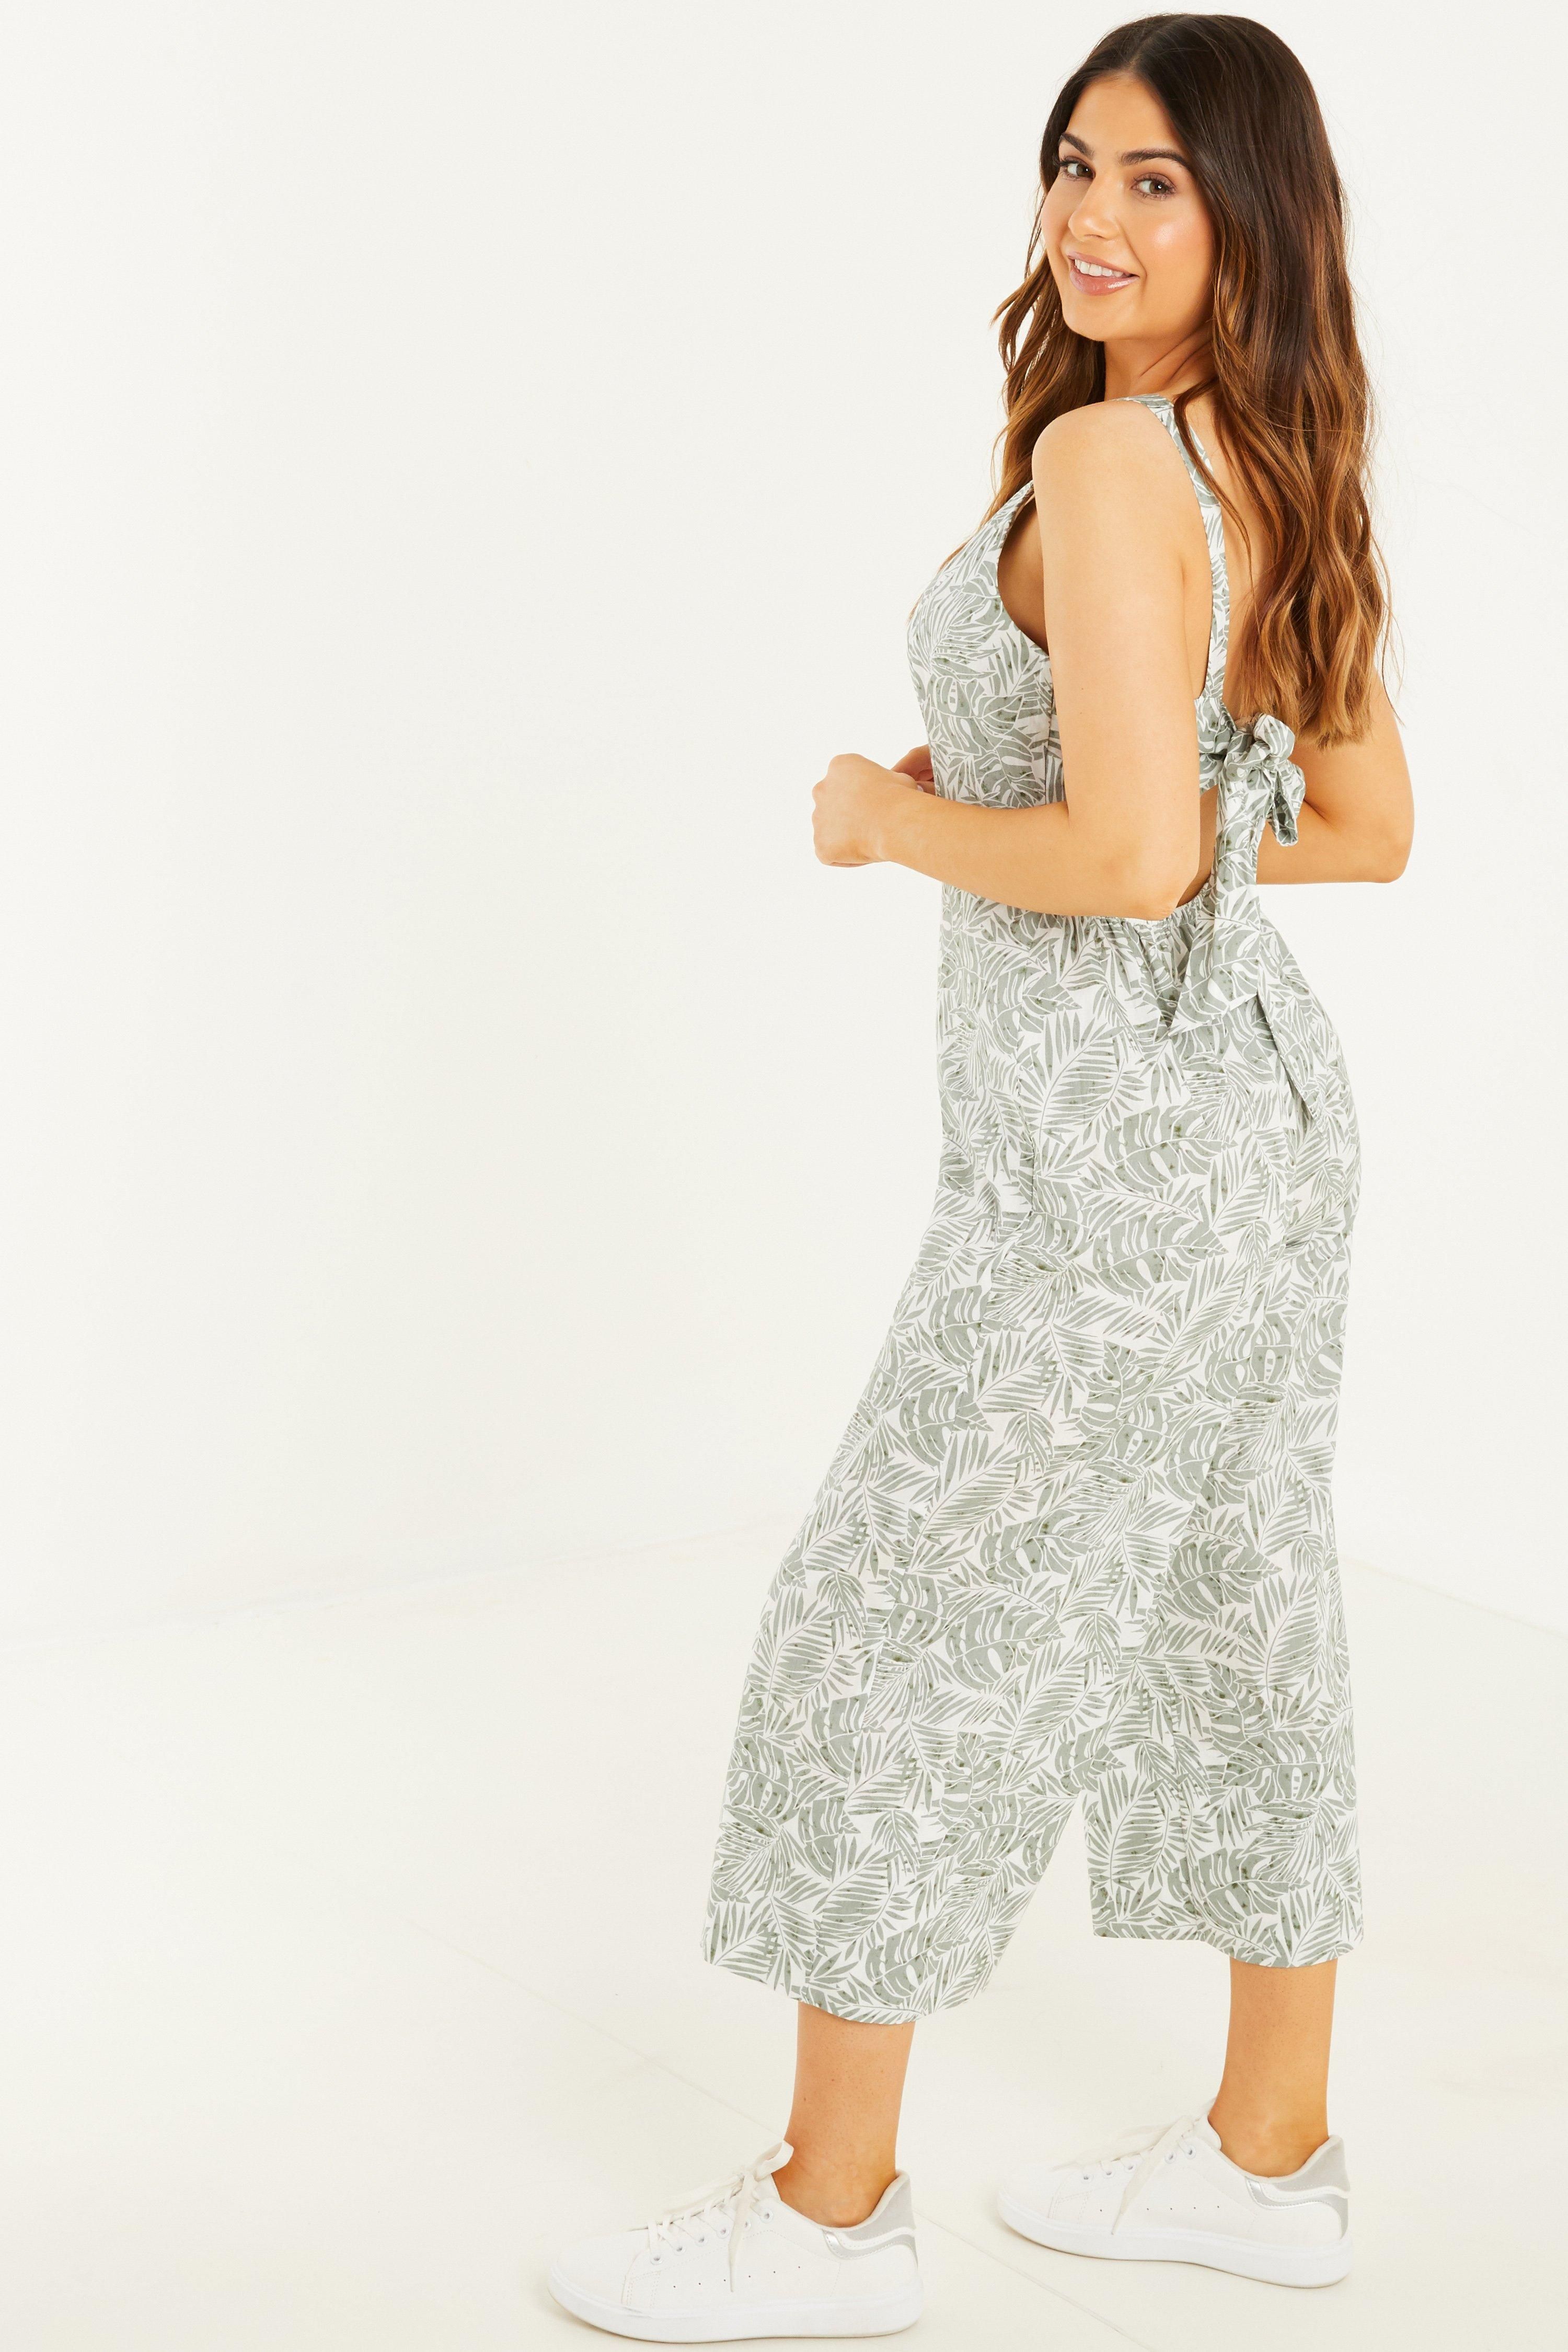 - Petite collection   - Tropical print  - Culotte style  - V neck   - Backless  - Tie back   - Length: 113 cm approx  - Model Height: 5' 3